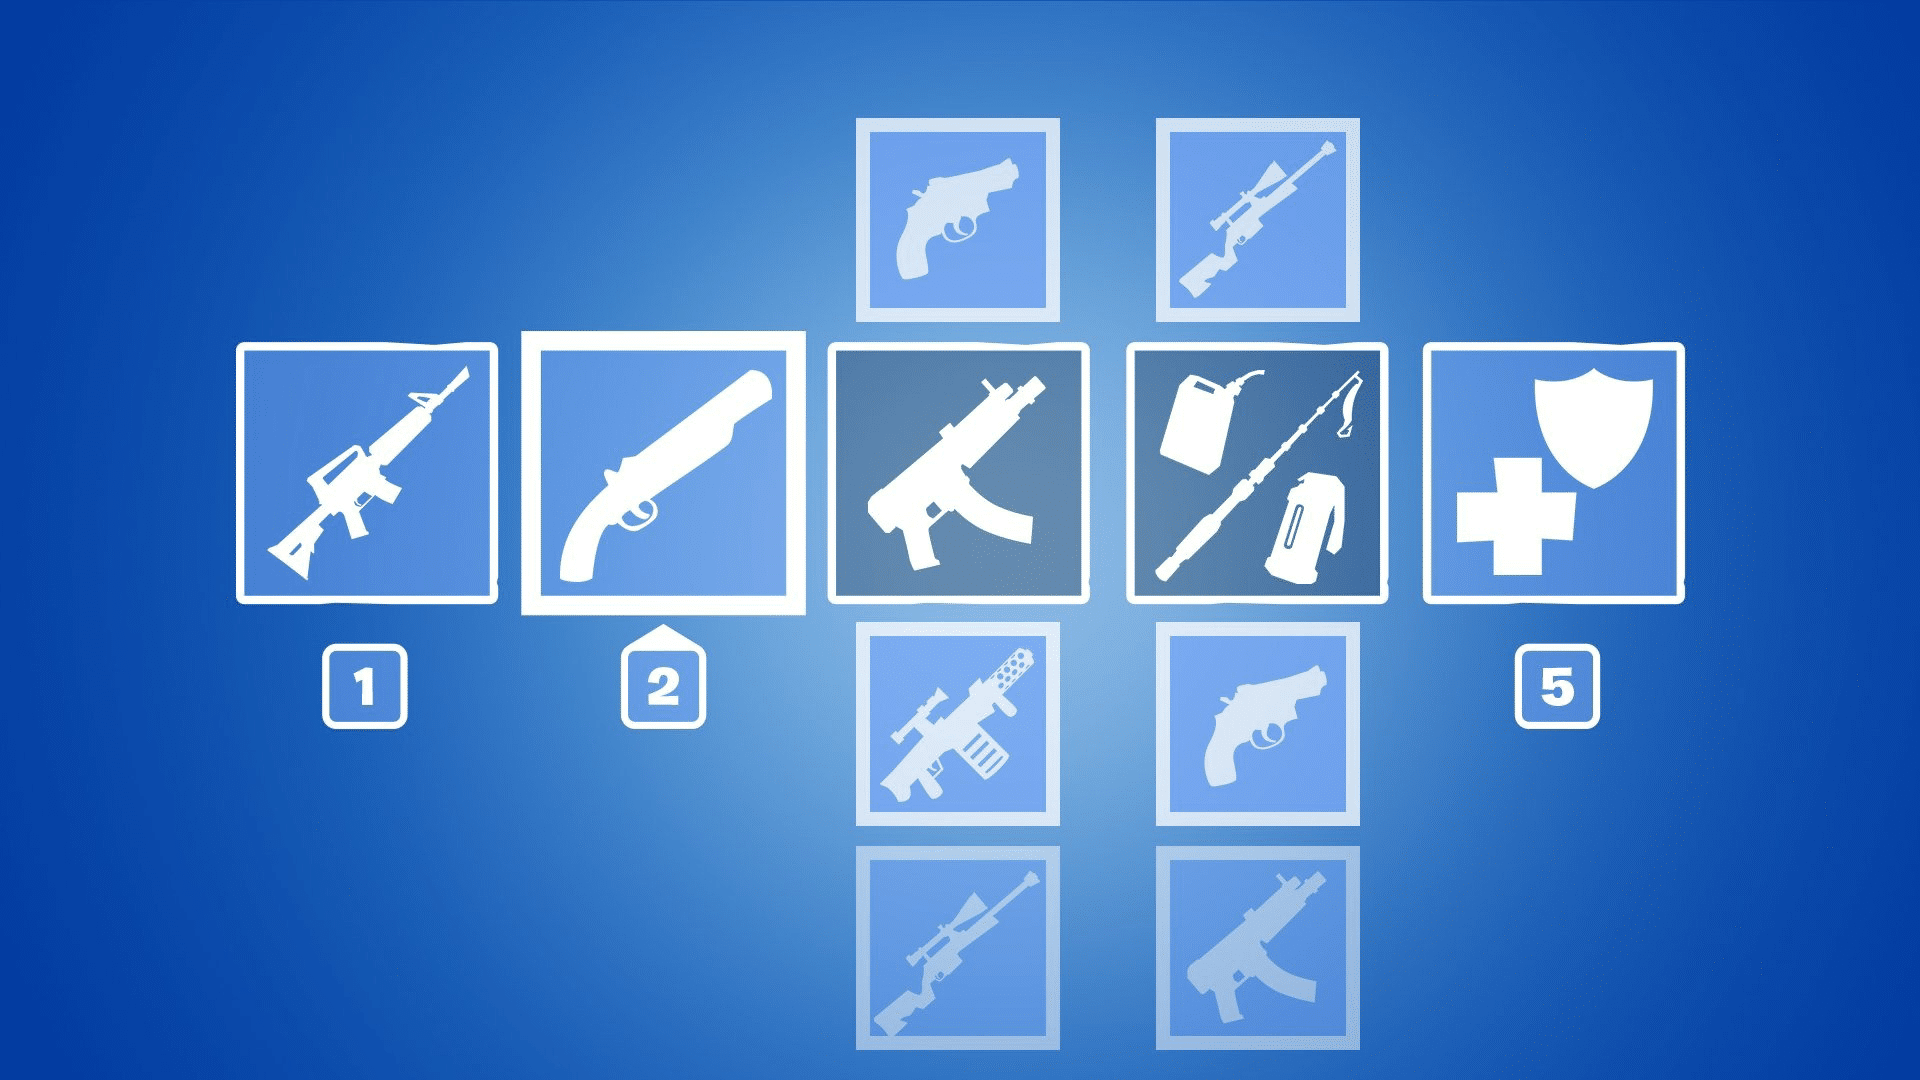 Slot keybinds for weapons and other items in Fortnite